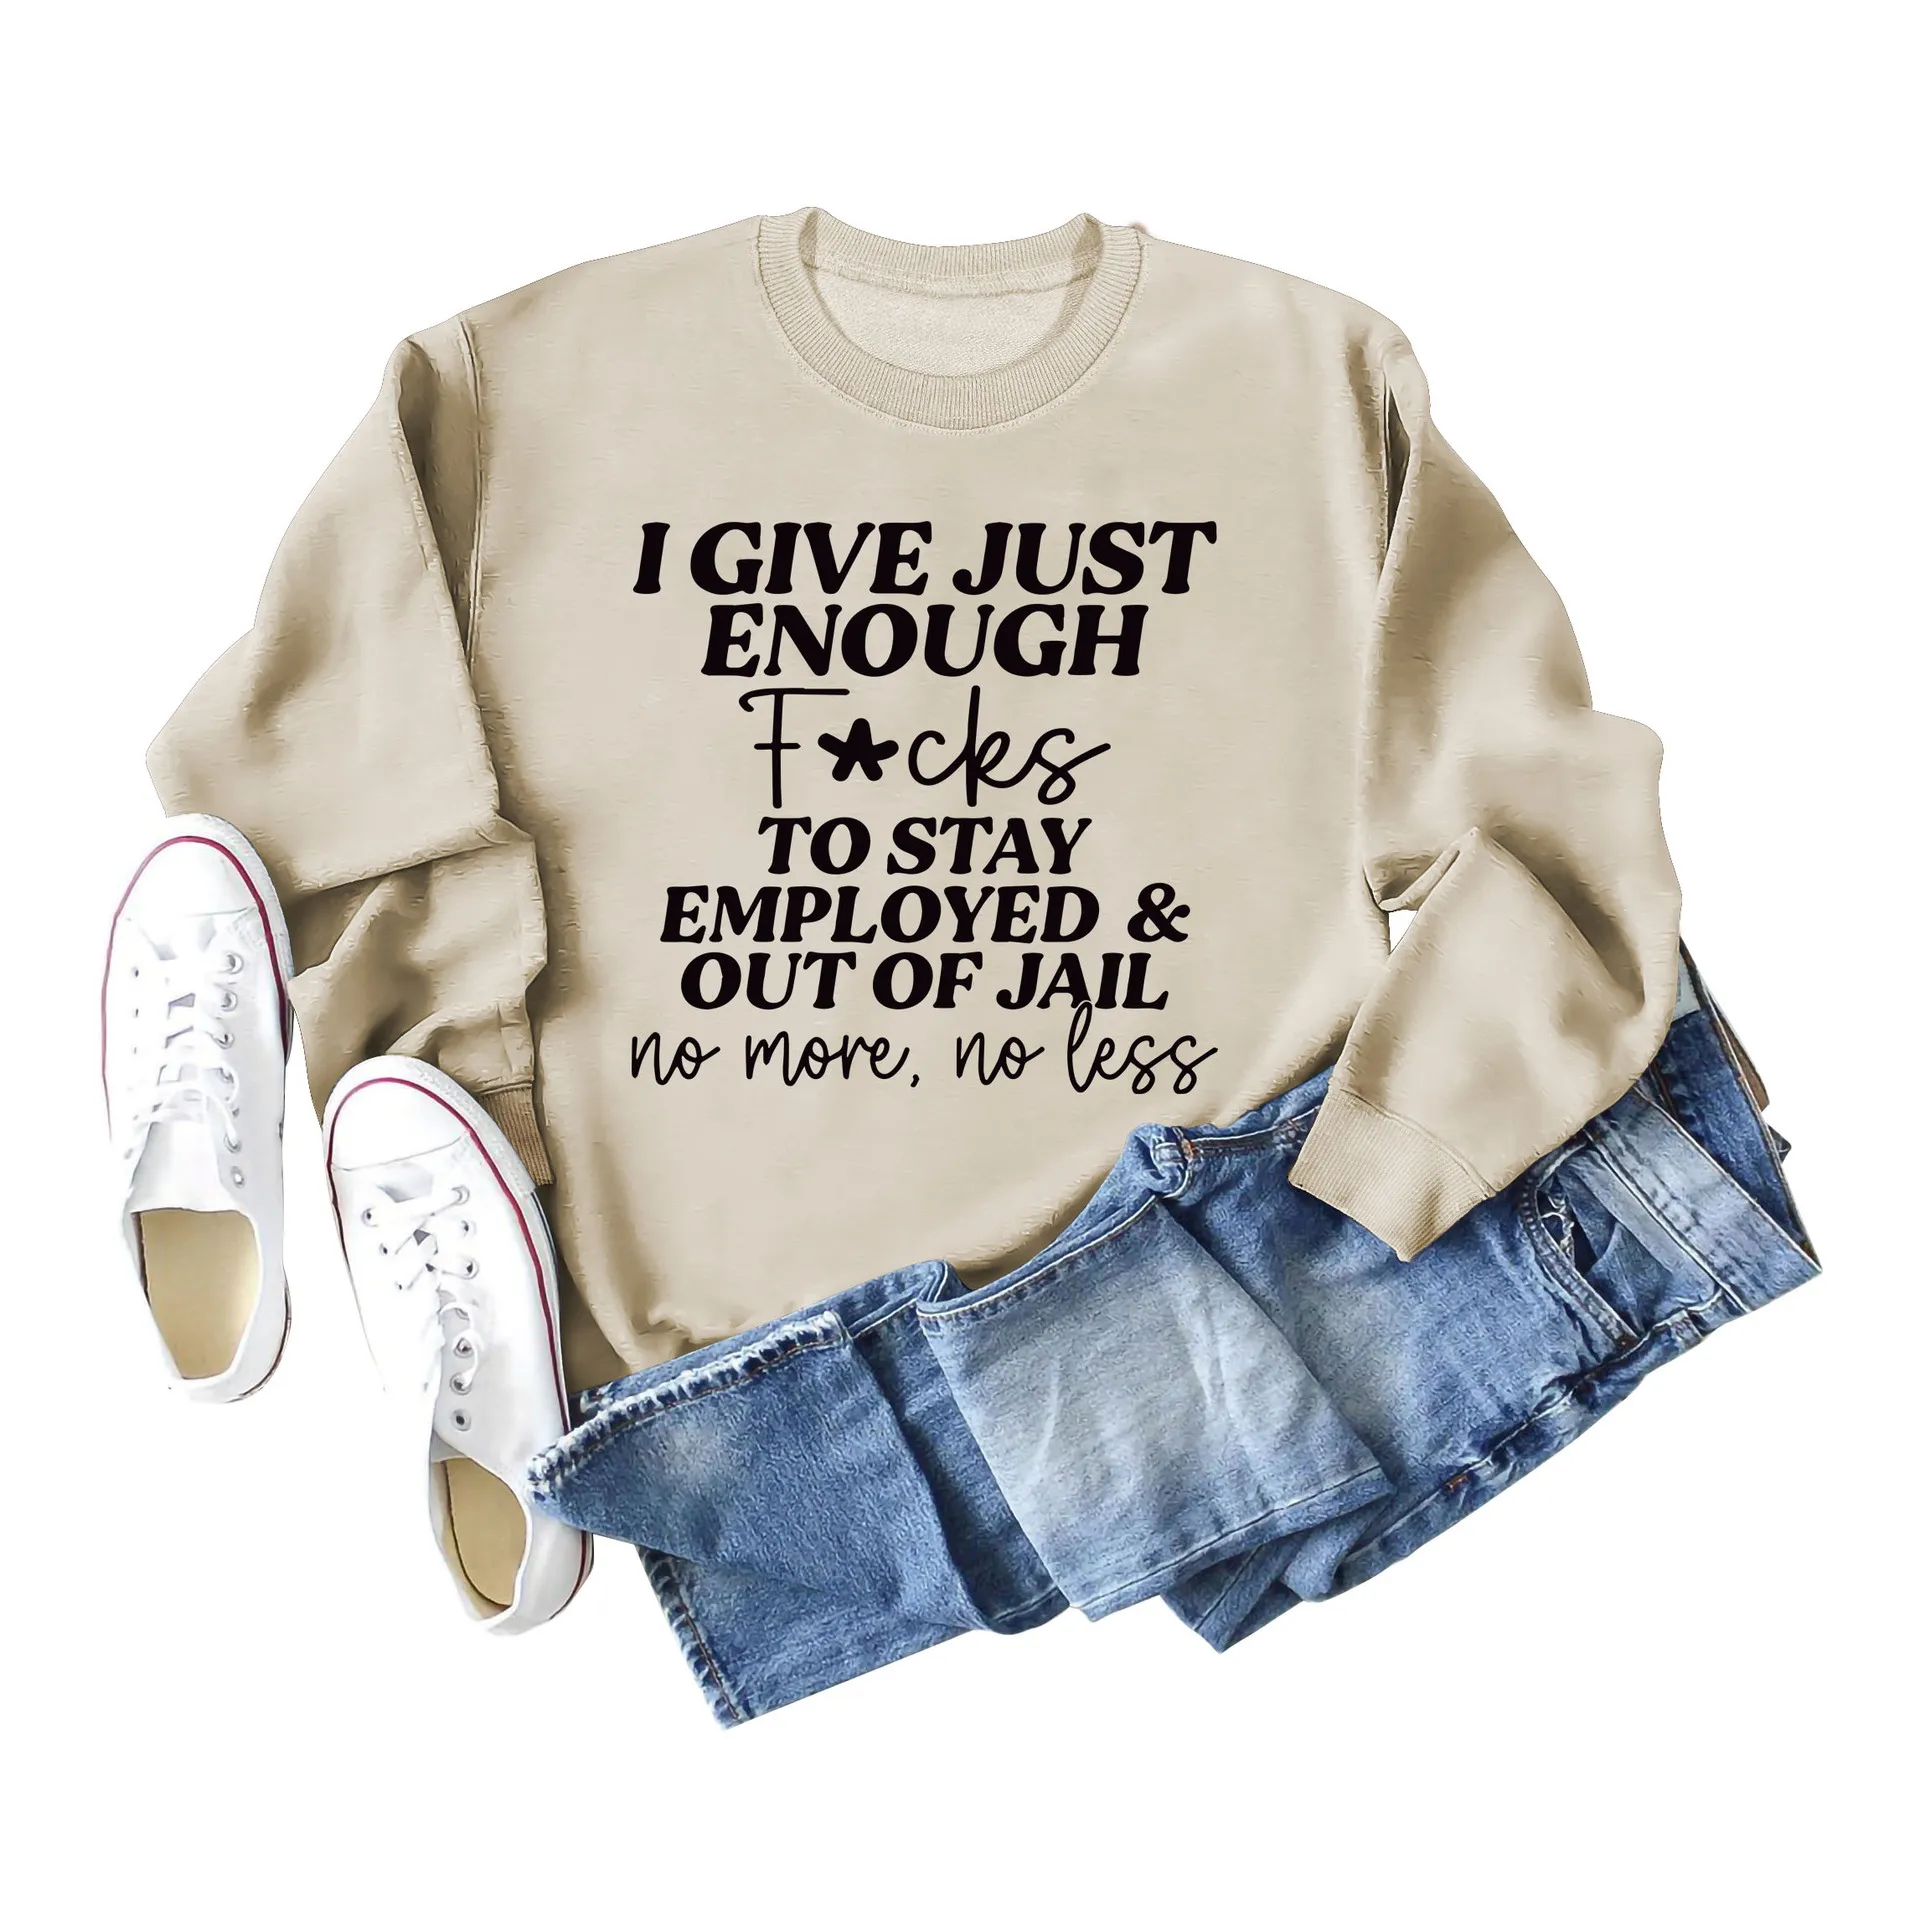 

I GIVE JUST ENOUGH Facks TO STAY Women's Long Sleeve Sweatshirt Women Clothing